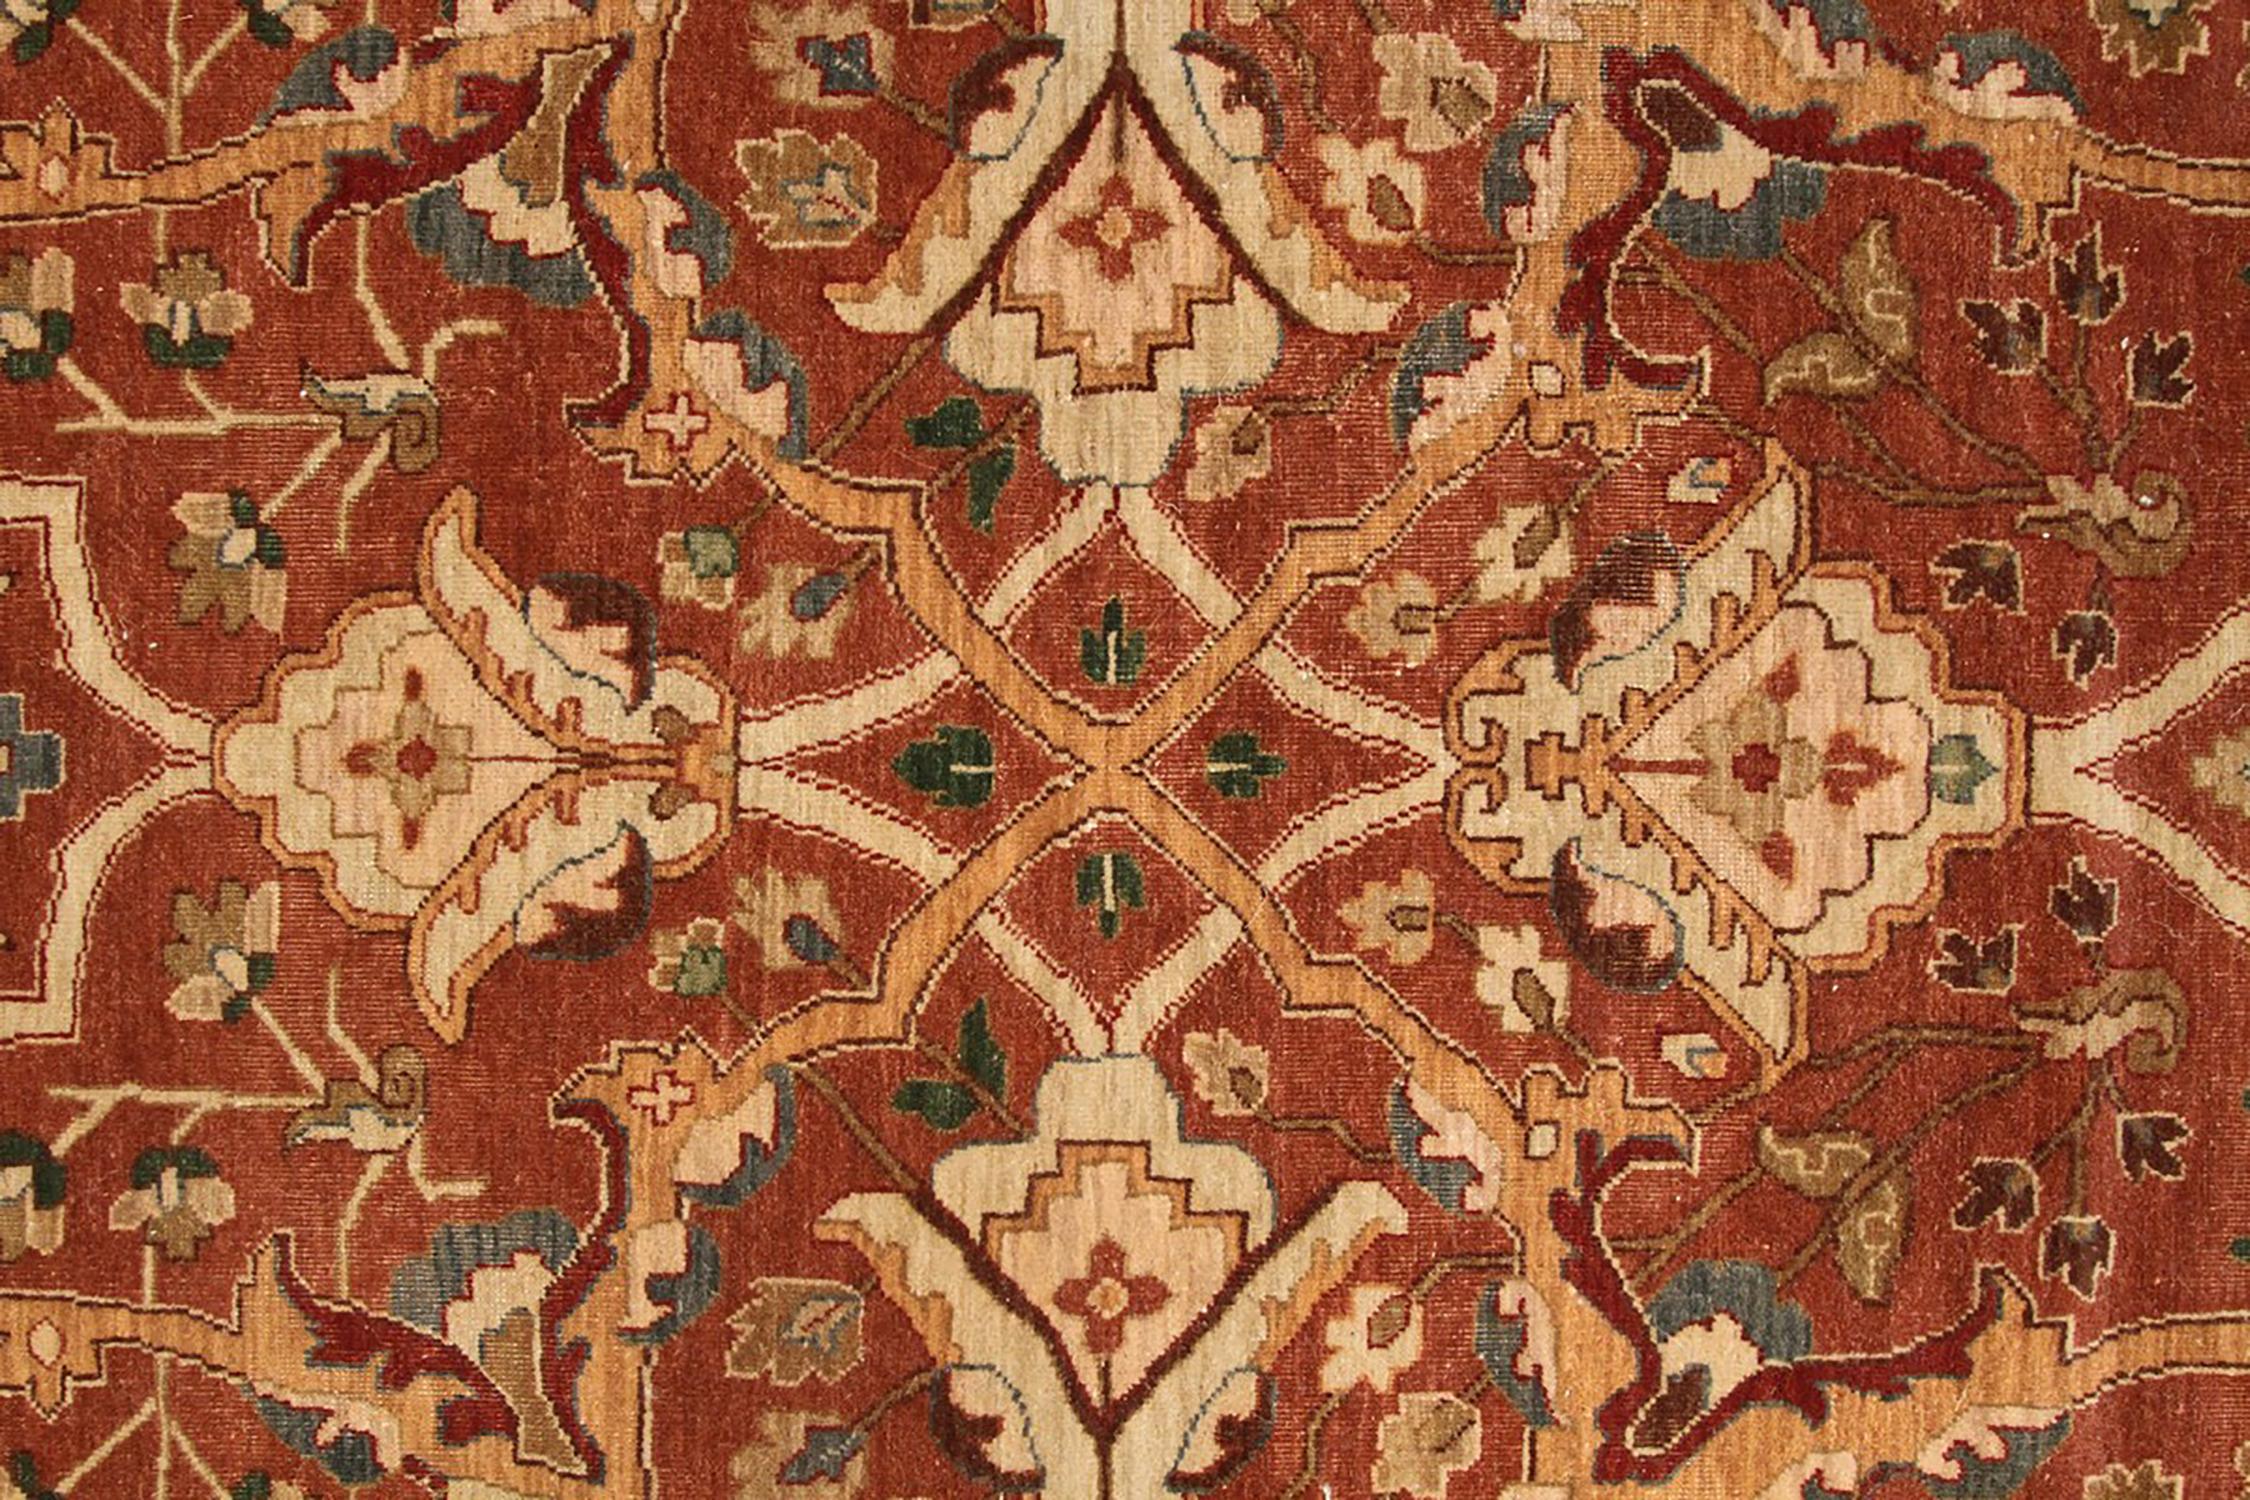 A 12 x 18 Persian rug homage from the Modern Classics collection by Rug & Kilim, hand knotted in wool with a particular influence from a transitional Tabriz rug style this near palace sized rug in handsome beige brown colorway hues. 

On the